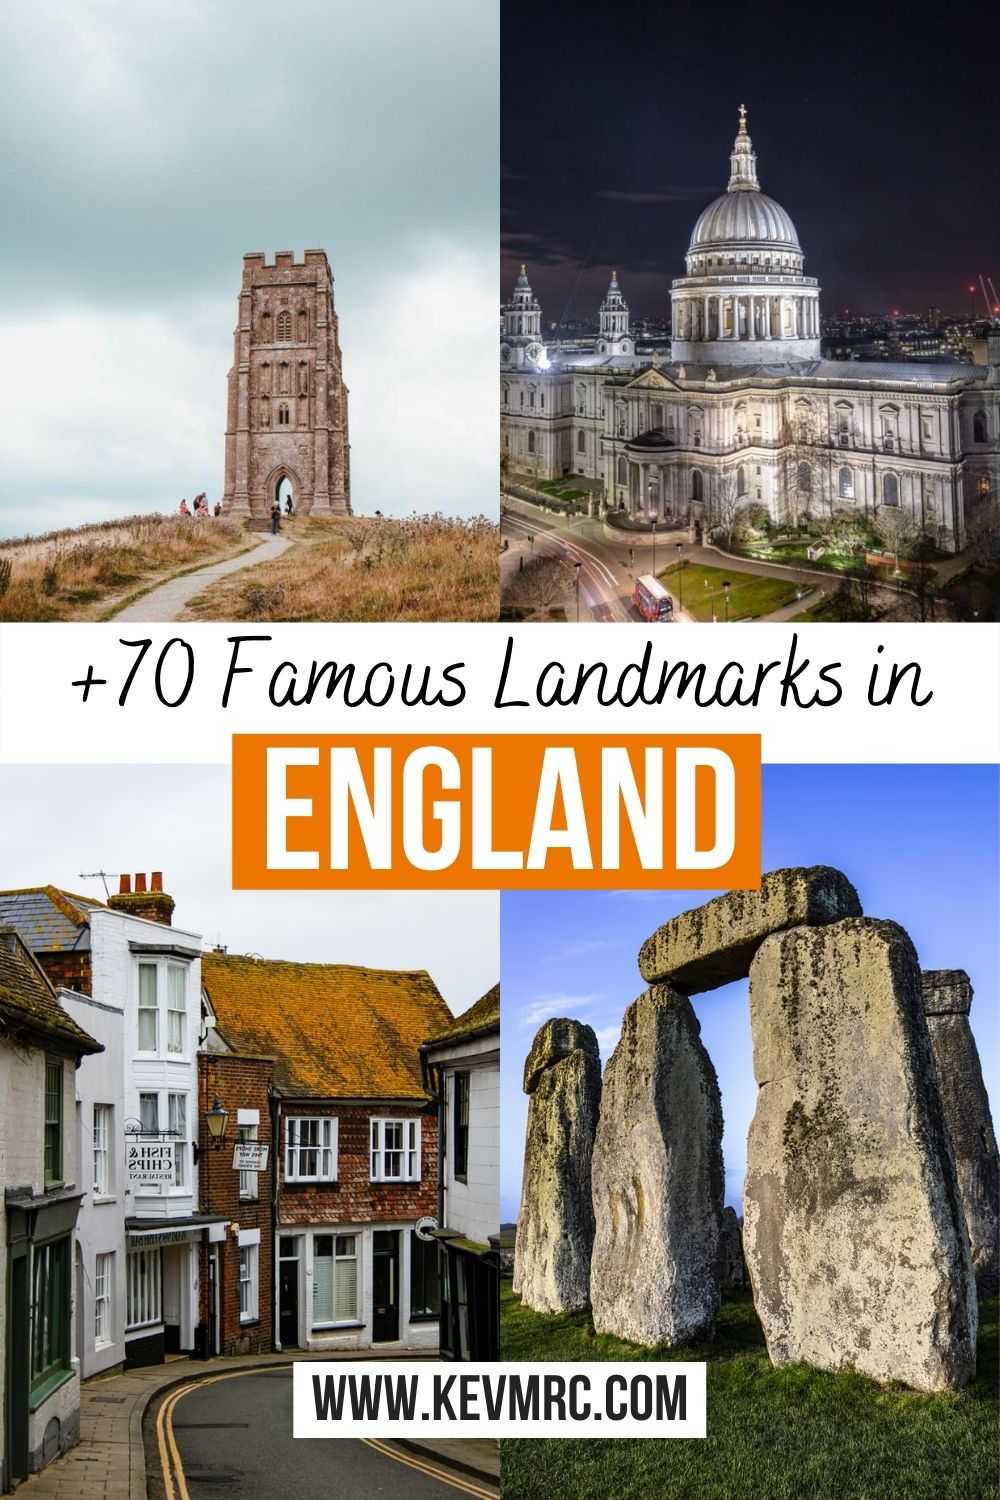 71 famous landmarks in england. Discover the best places to see in England UK! england travel | travel england #england